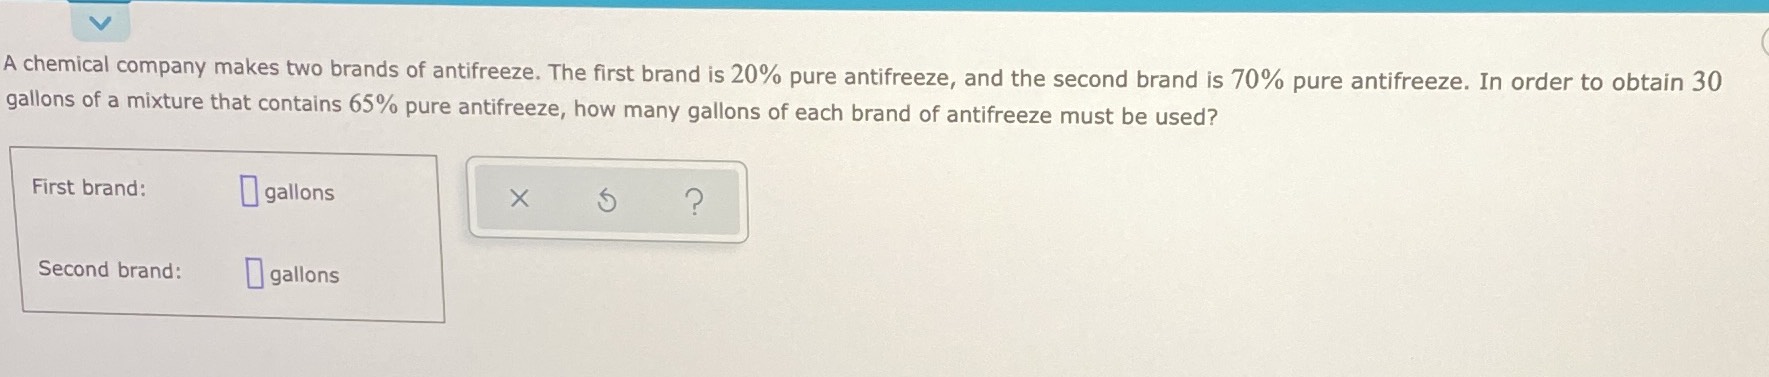 A chemical company makes two brands of antifreeze....